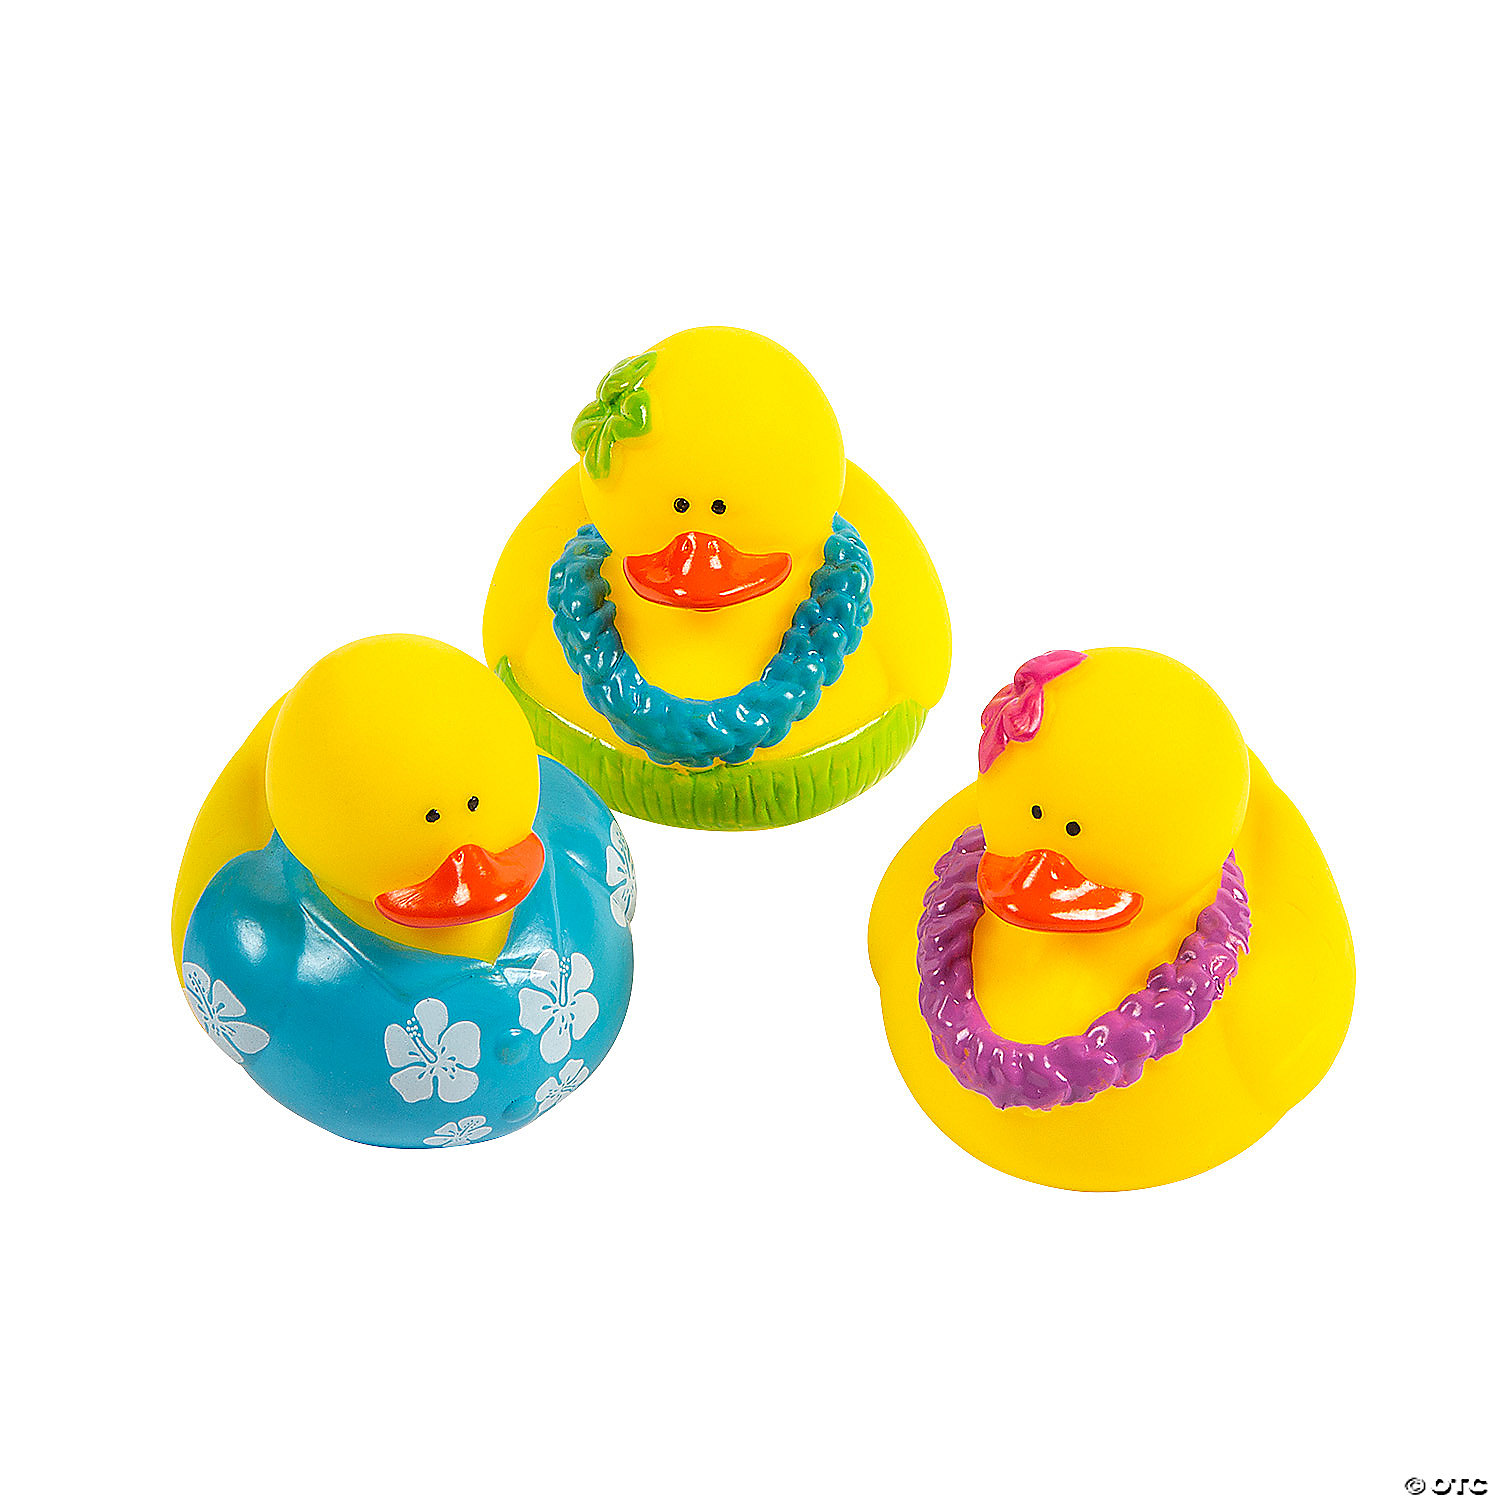 dressed up rubber ducks